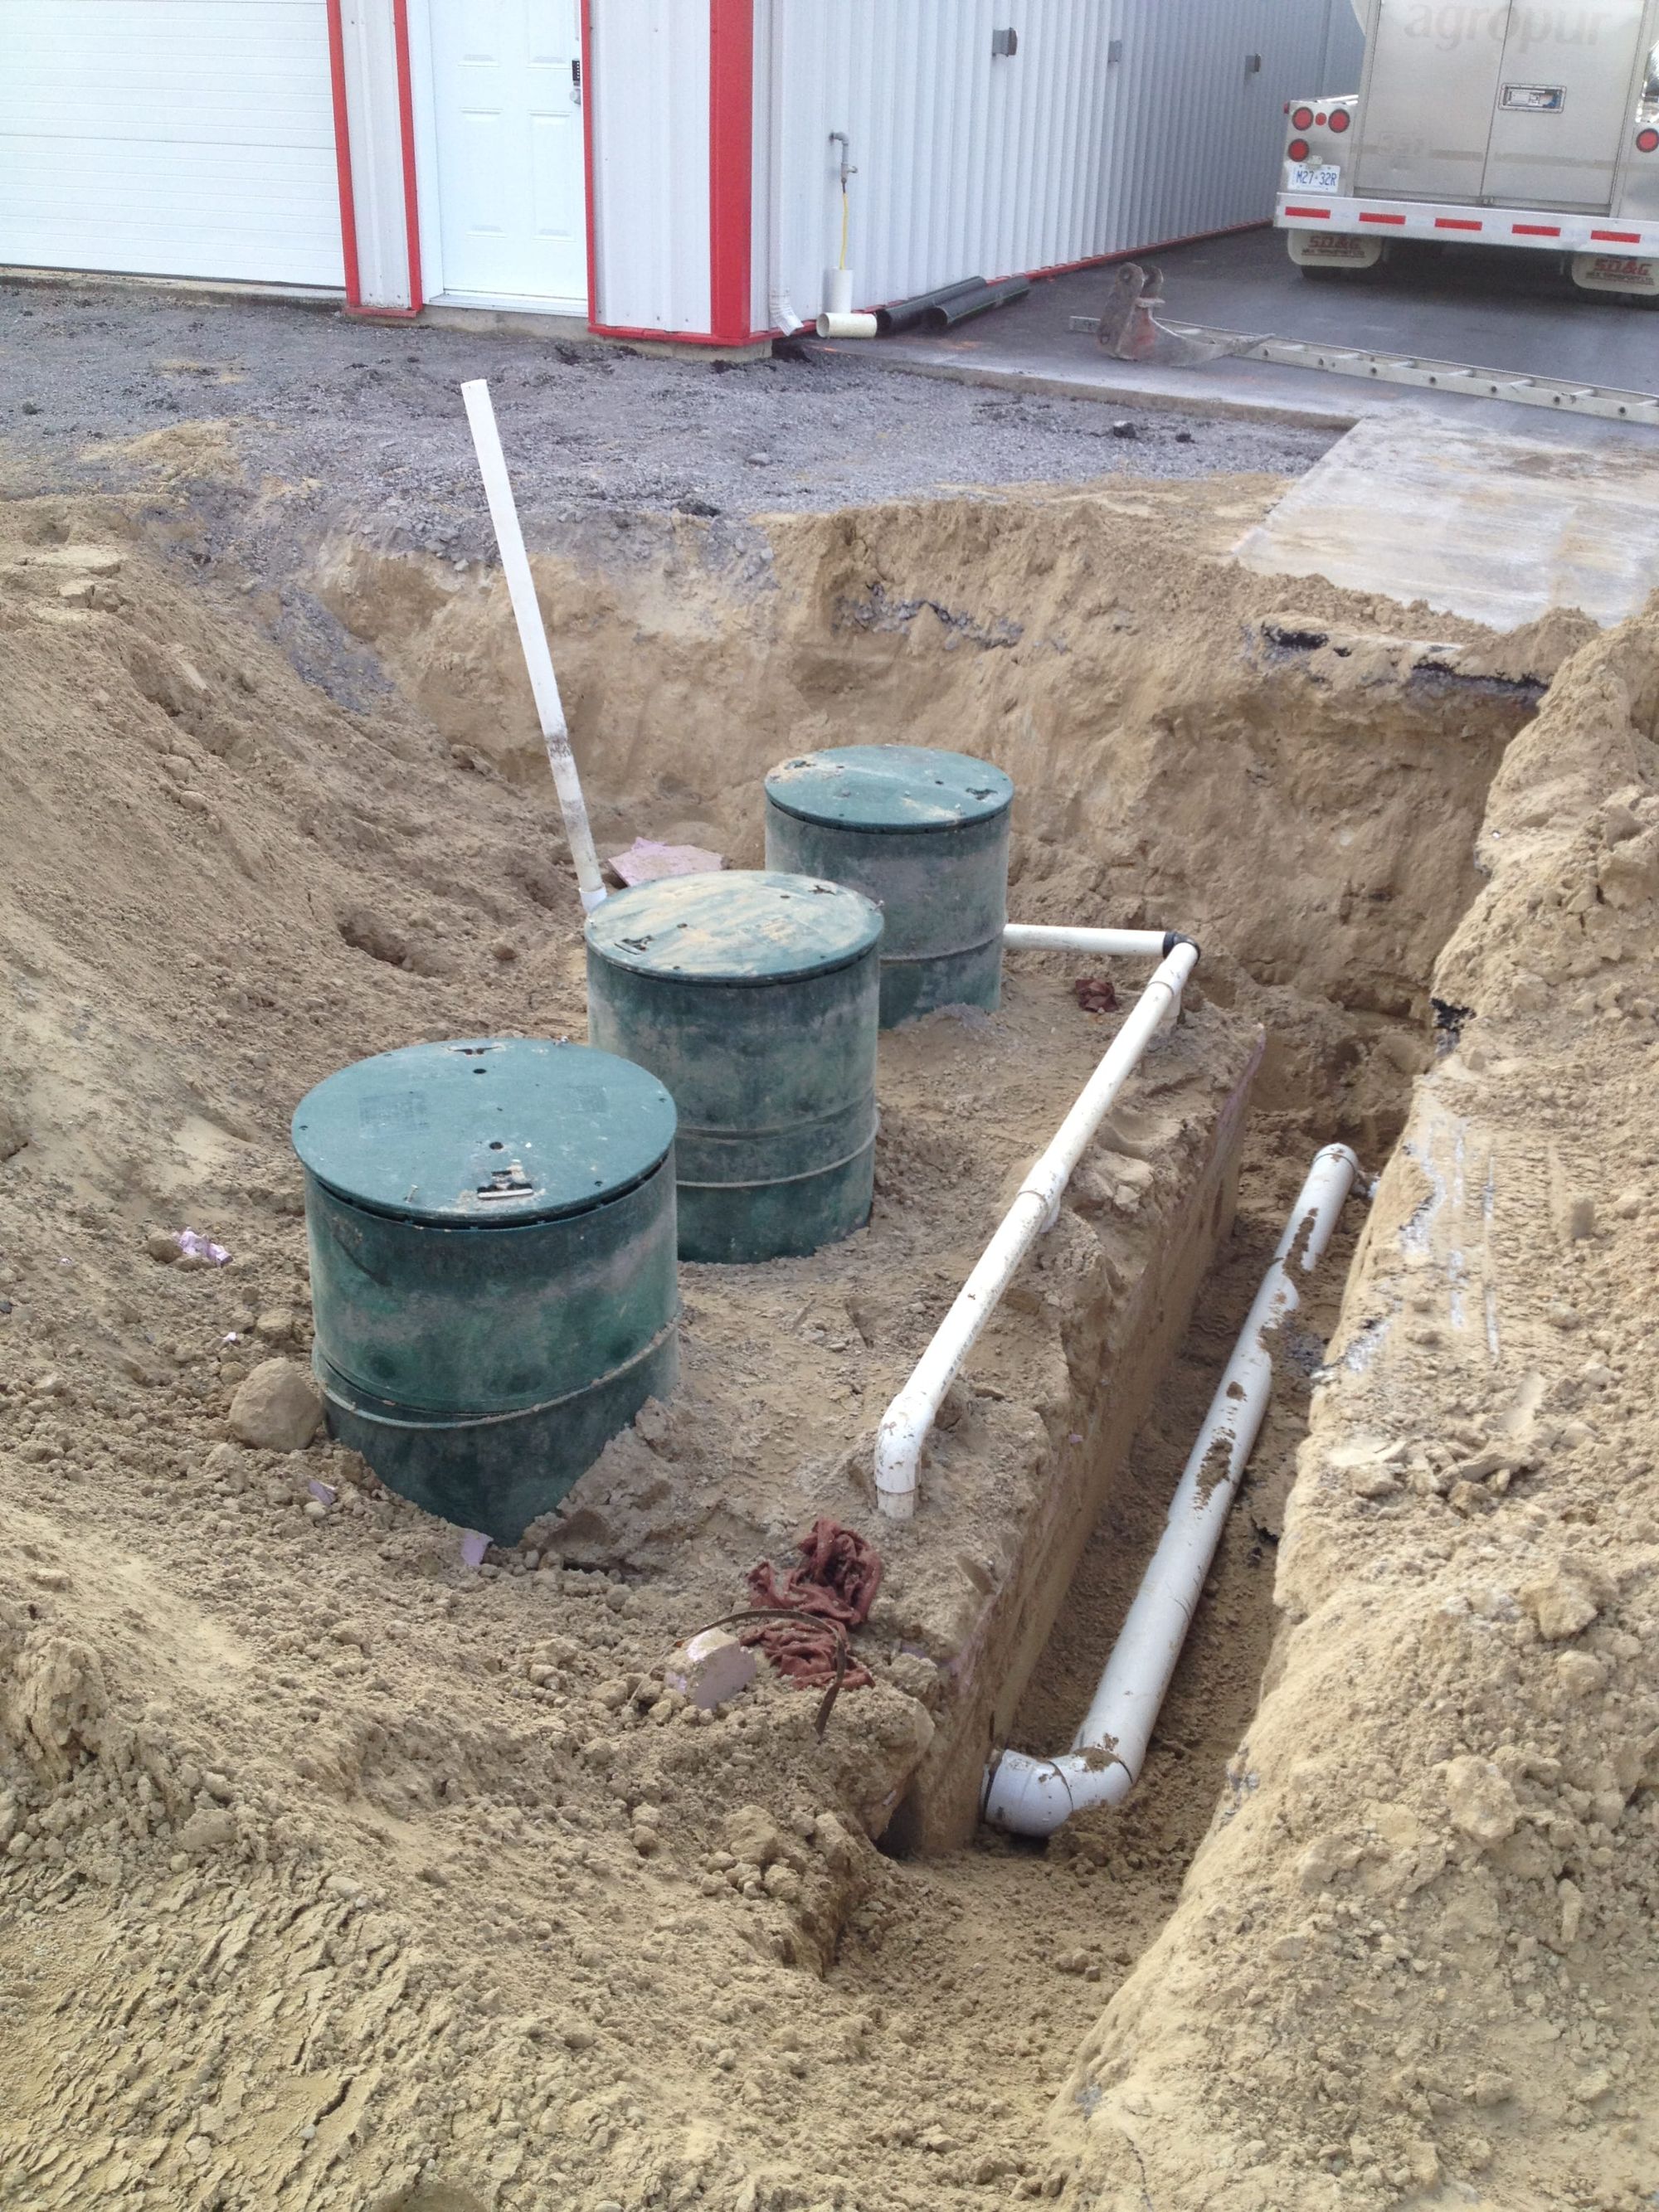 Septic service providers invited to information session